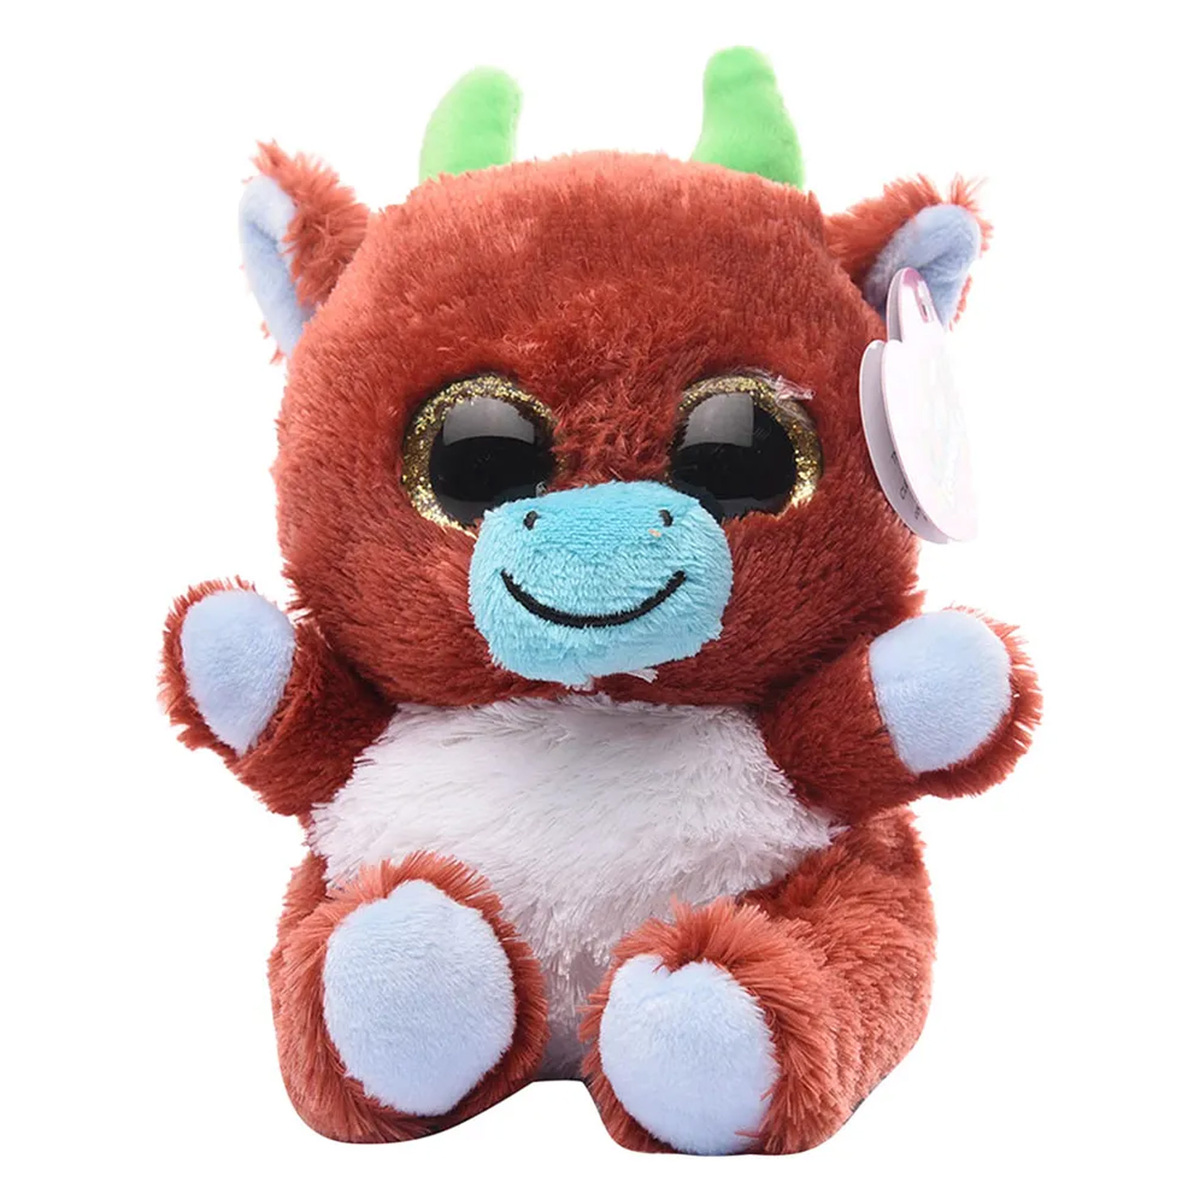 Cuddly Lovables Bison Plush Toy, CL10